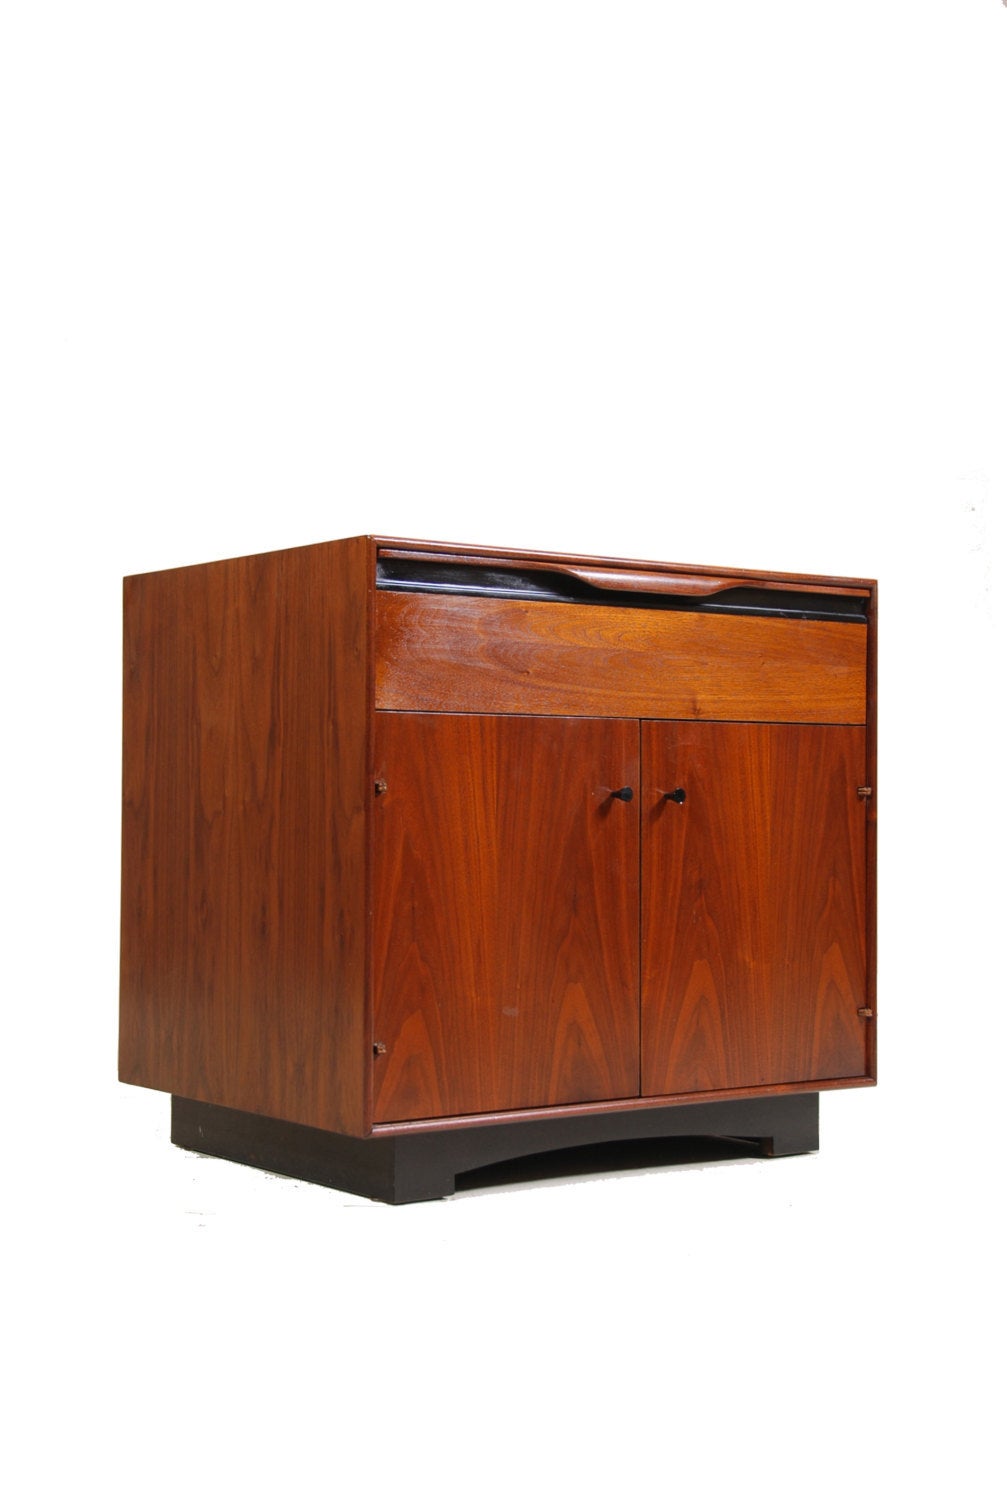 Pair of John Kapel Night Stands for Glenn of California.
Made from beautifully selected walnut. Features top drawer and closed cabinet with adjustable shelf. These are in very good vintage condition with age appropriate wear.